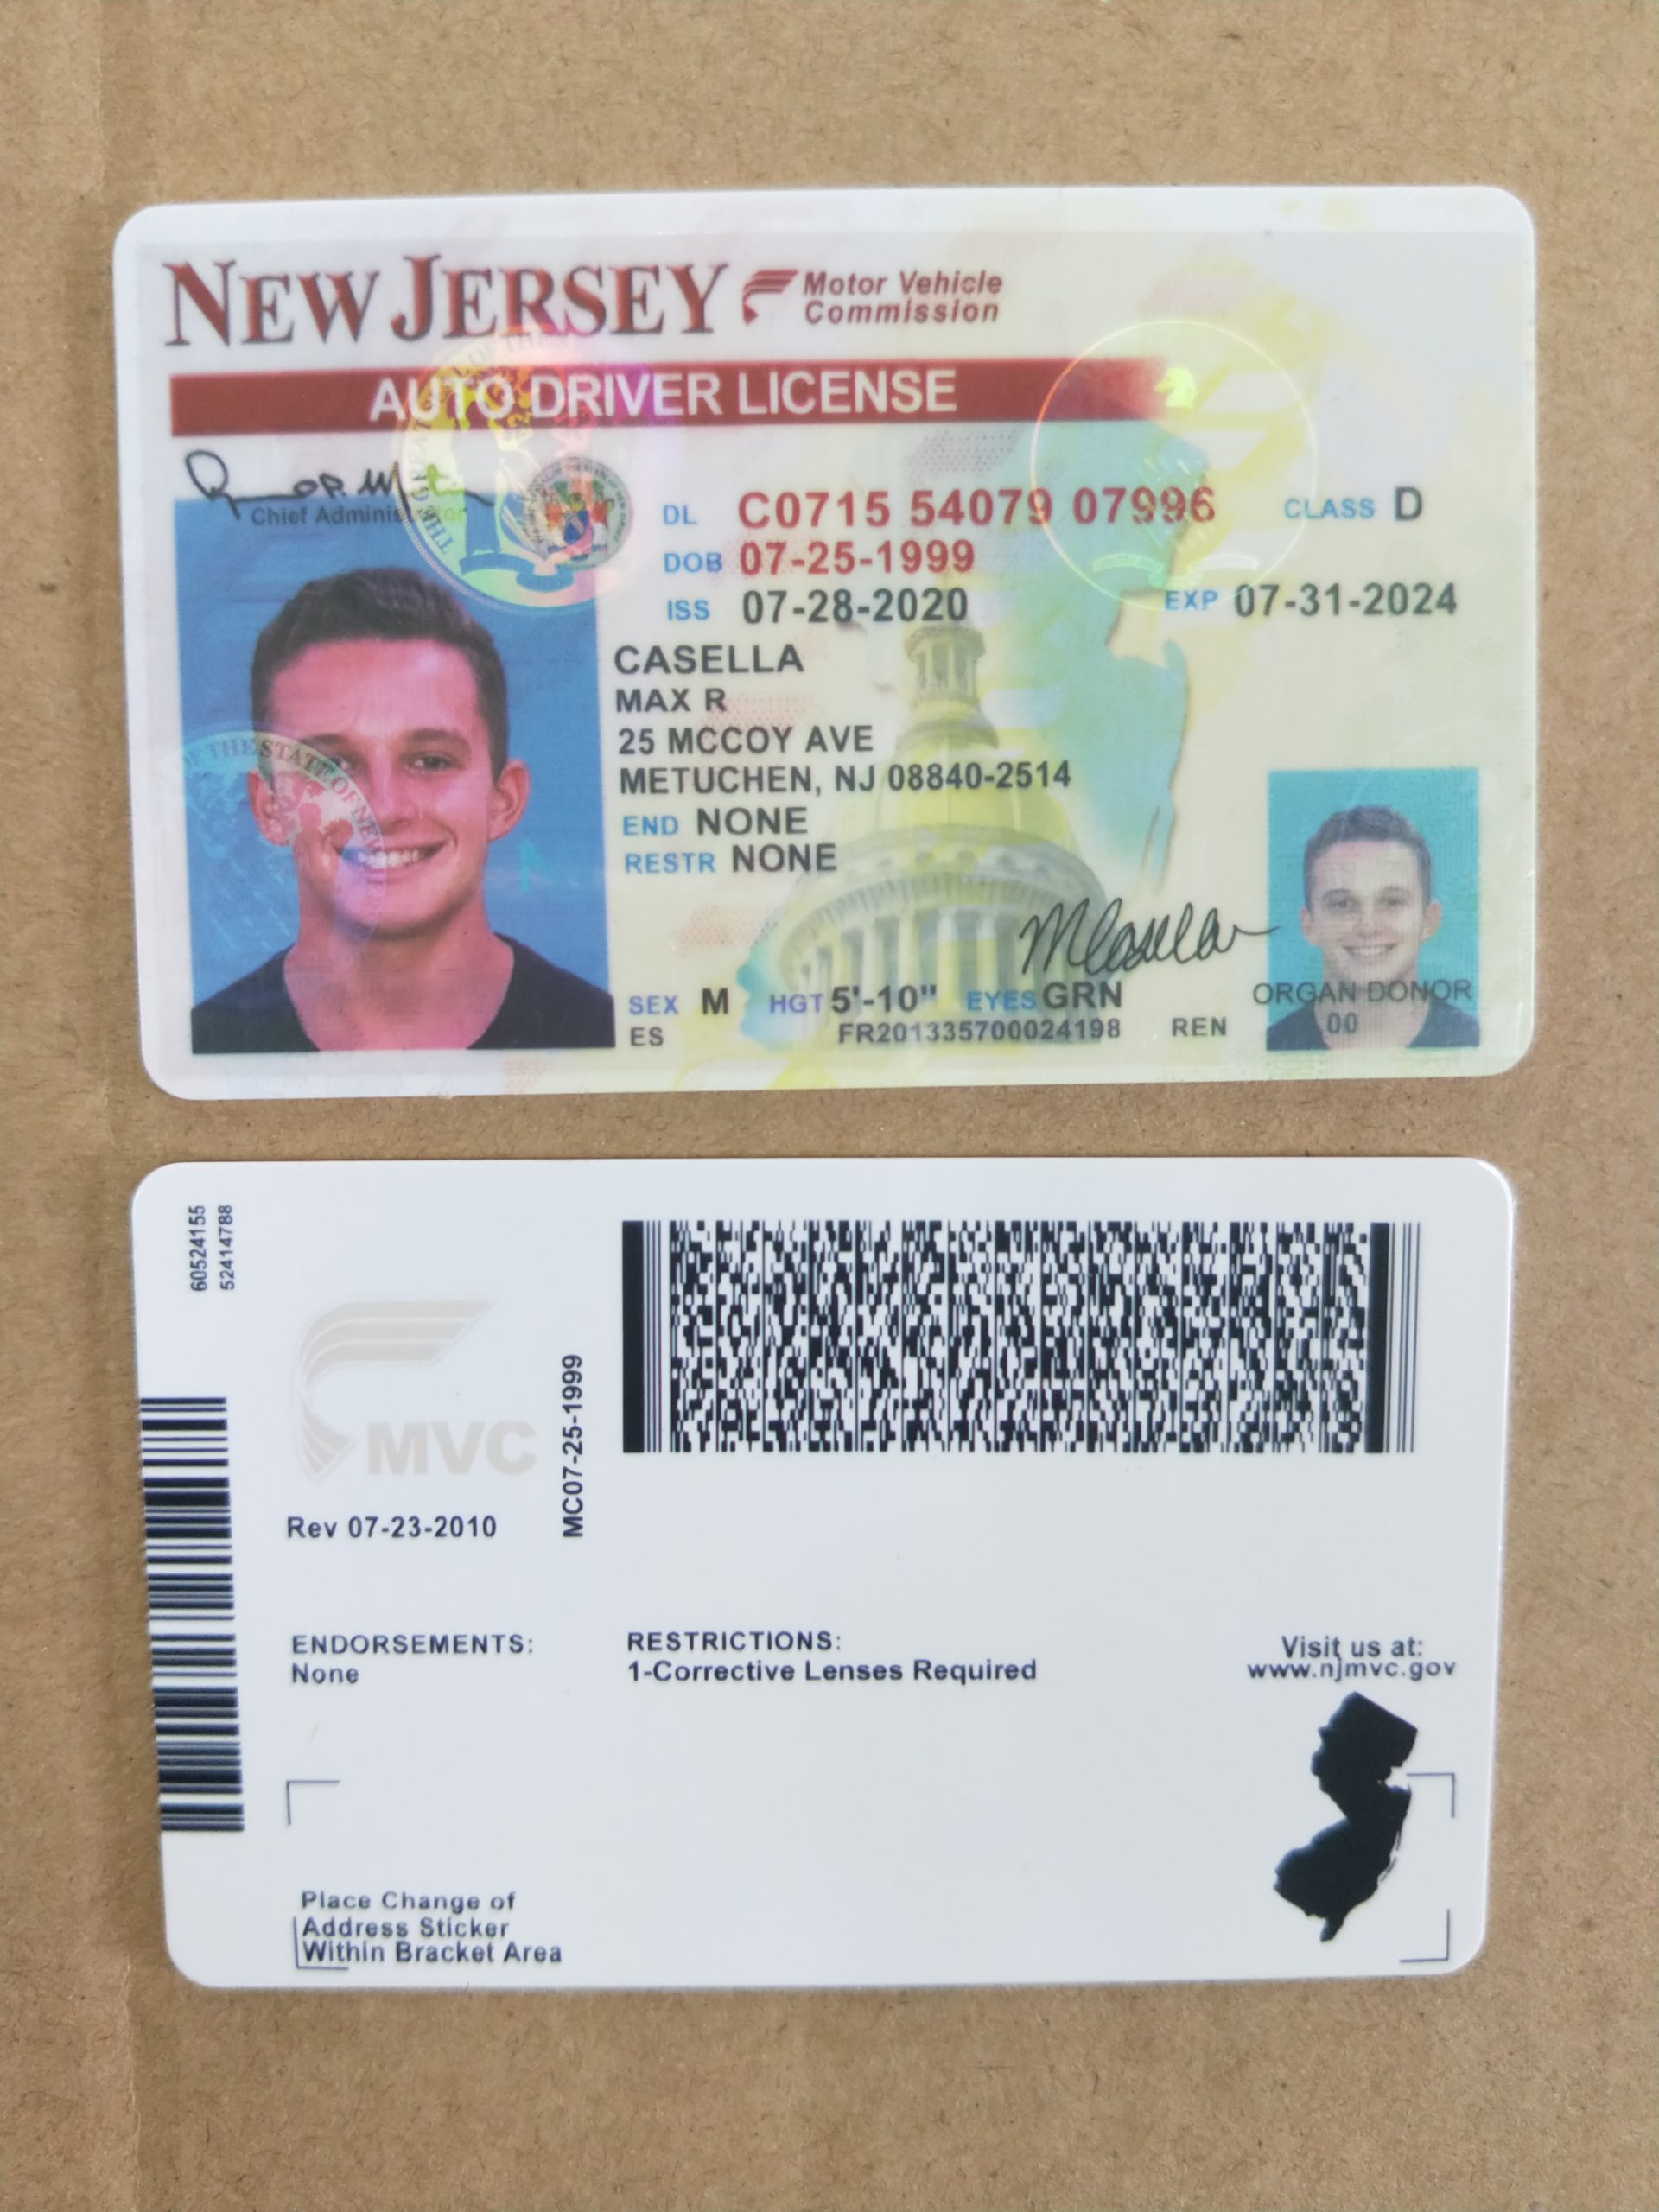 is it easy to fake a new jersey id